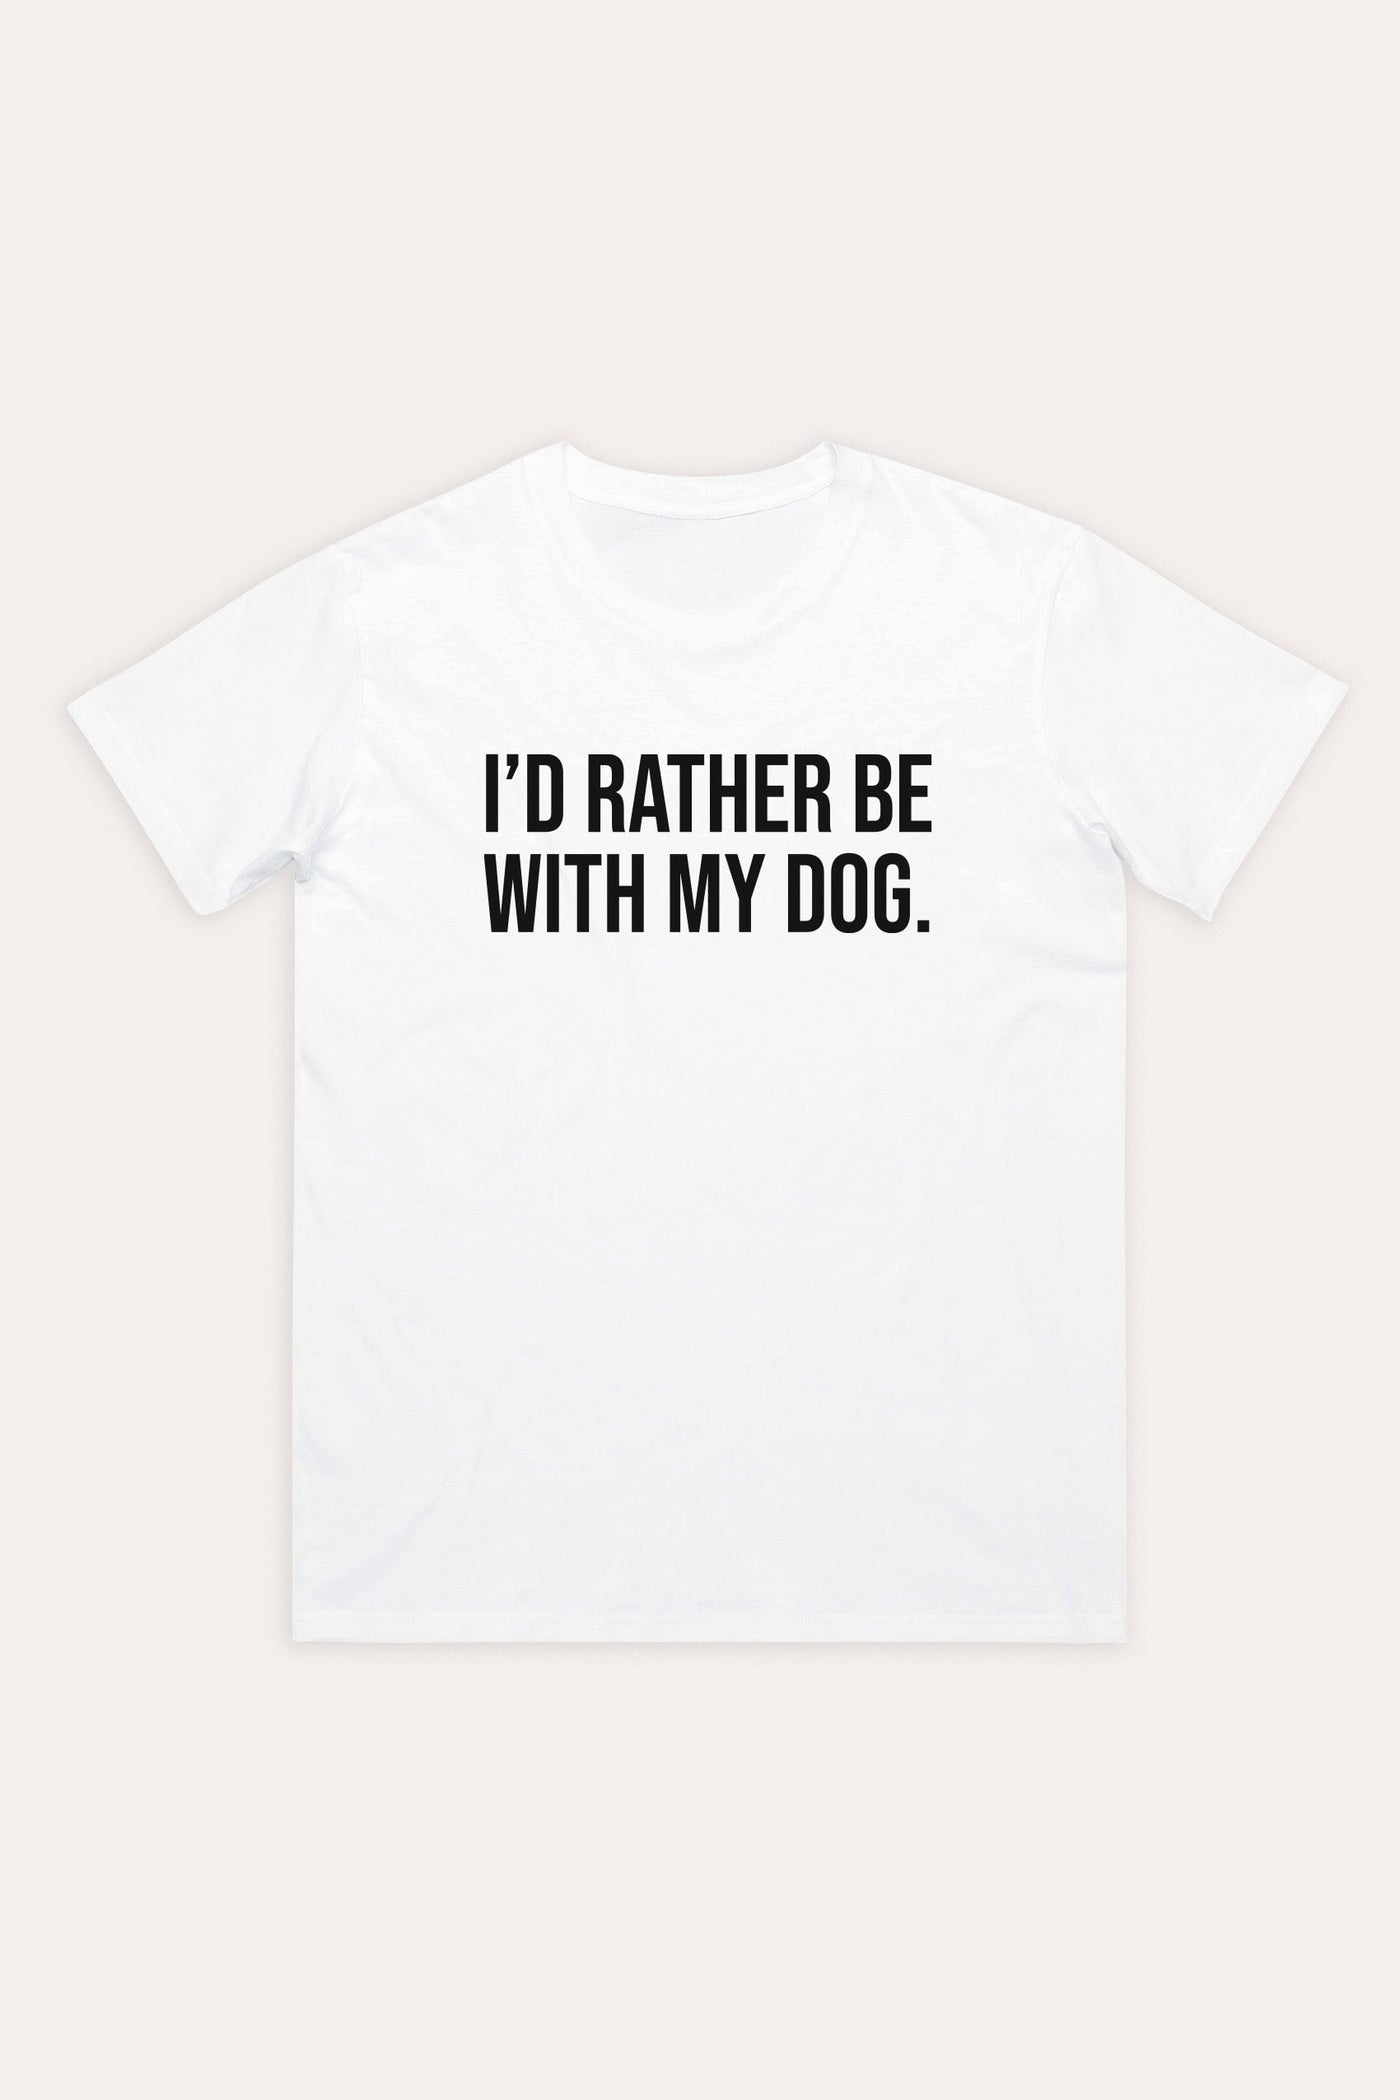 I'd Rather My Dog Tapered T-Shirt White Shirts Selfawear 